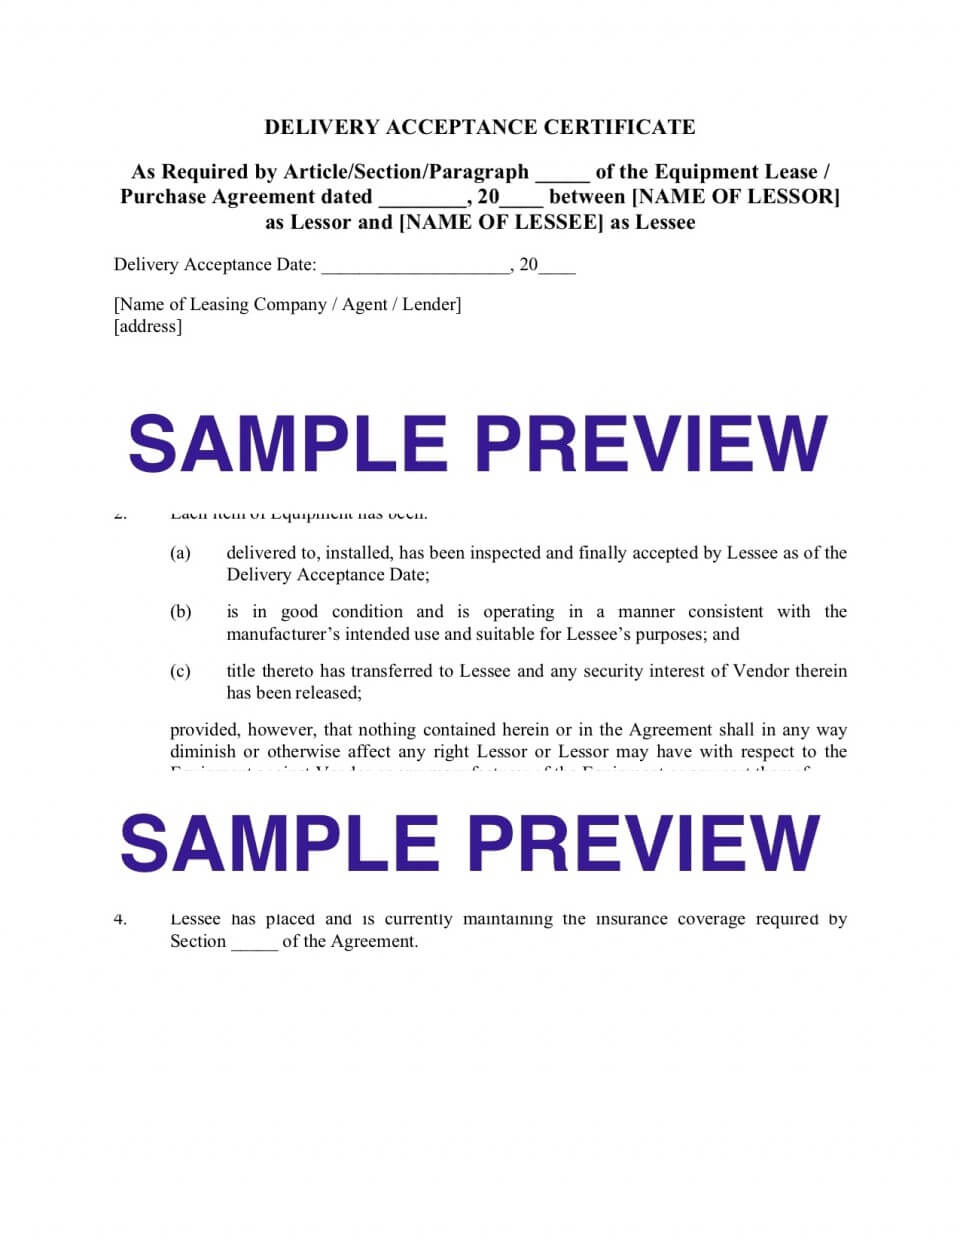 027 Equipment Lease Purchase Agreement Template Ideas Pertaining To Certificate Of Acceptance Template